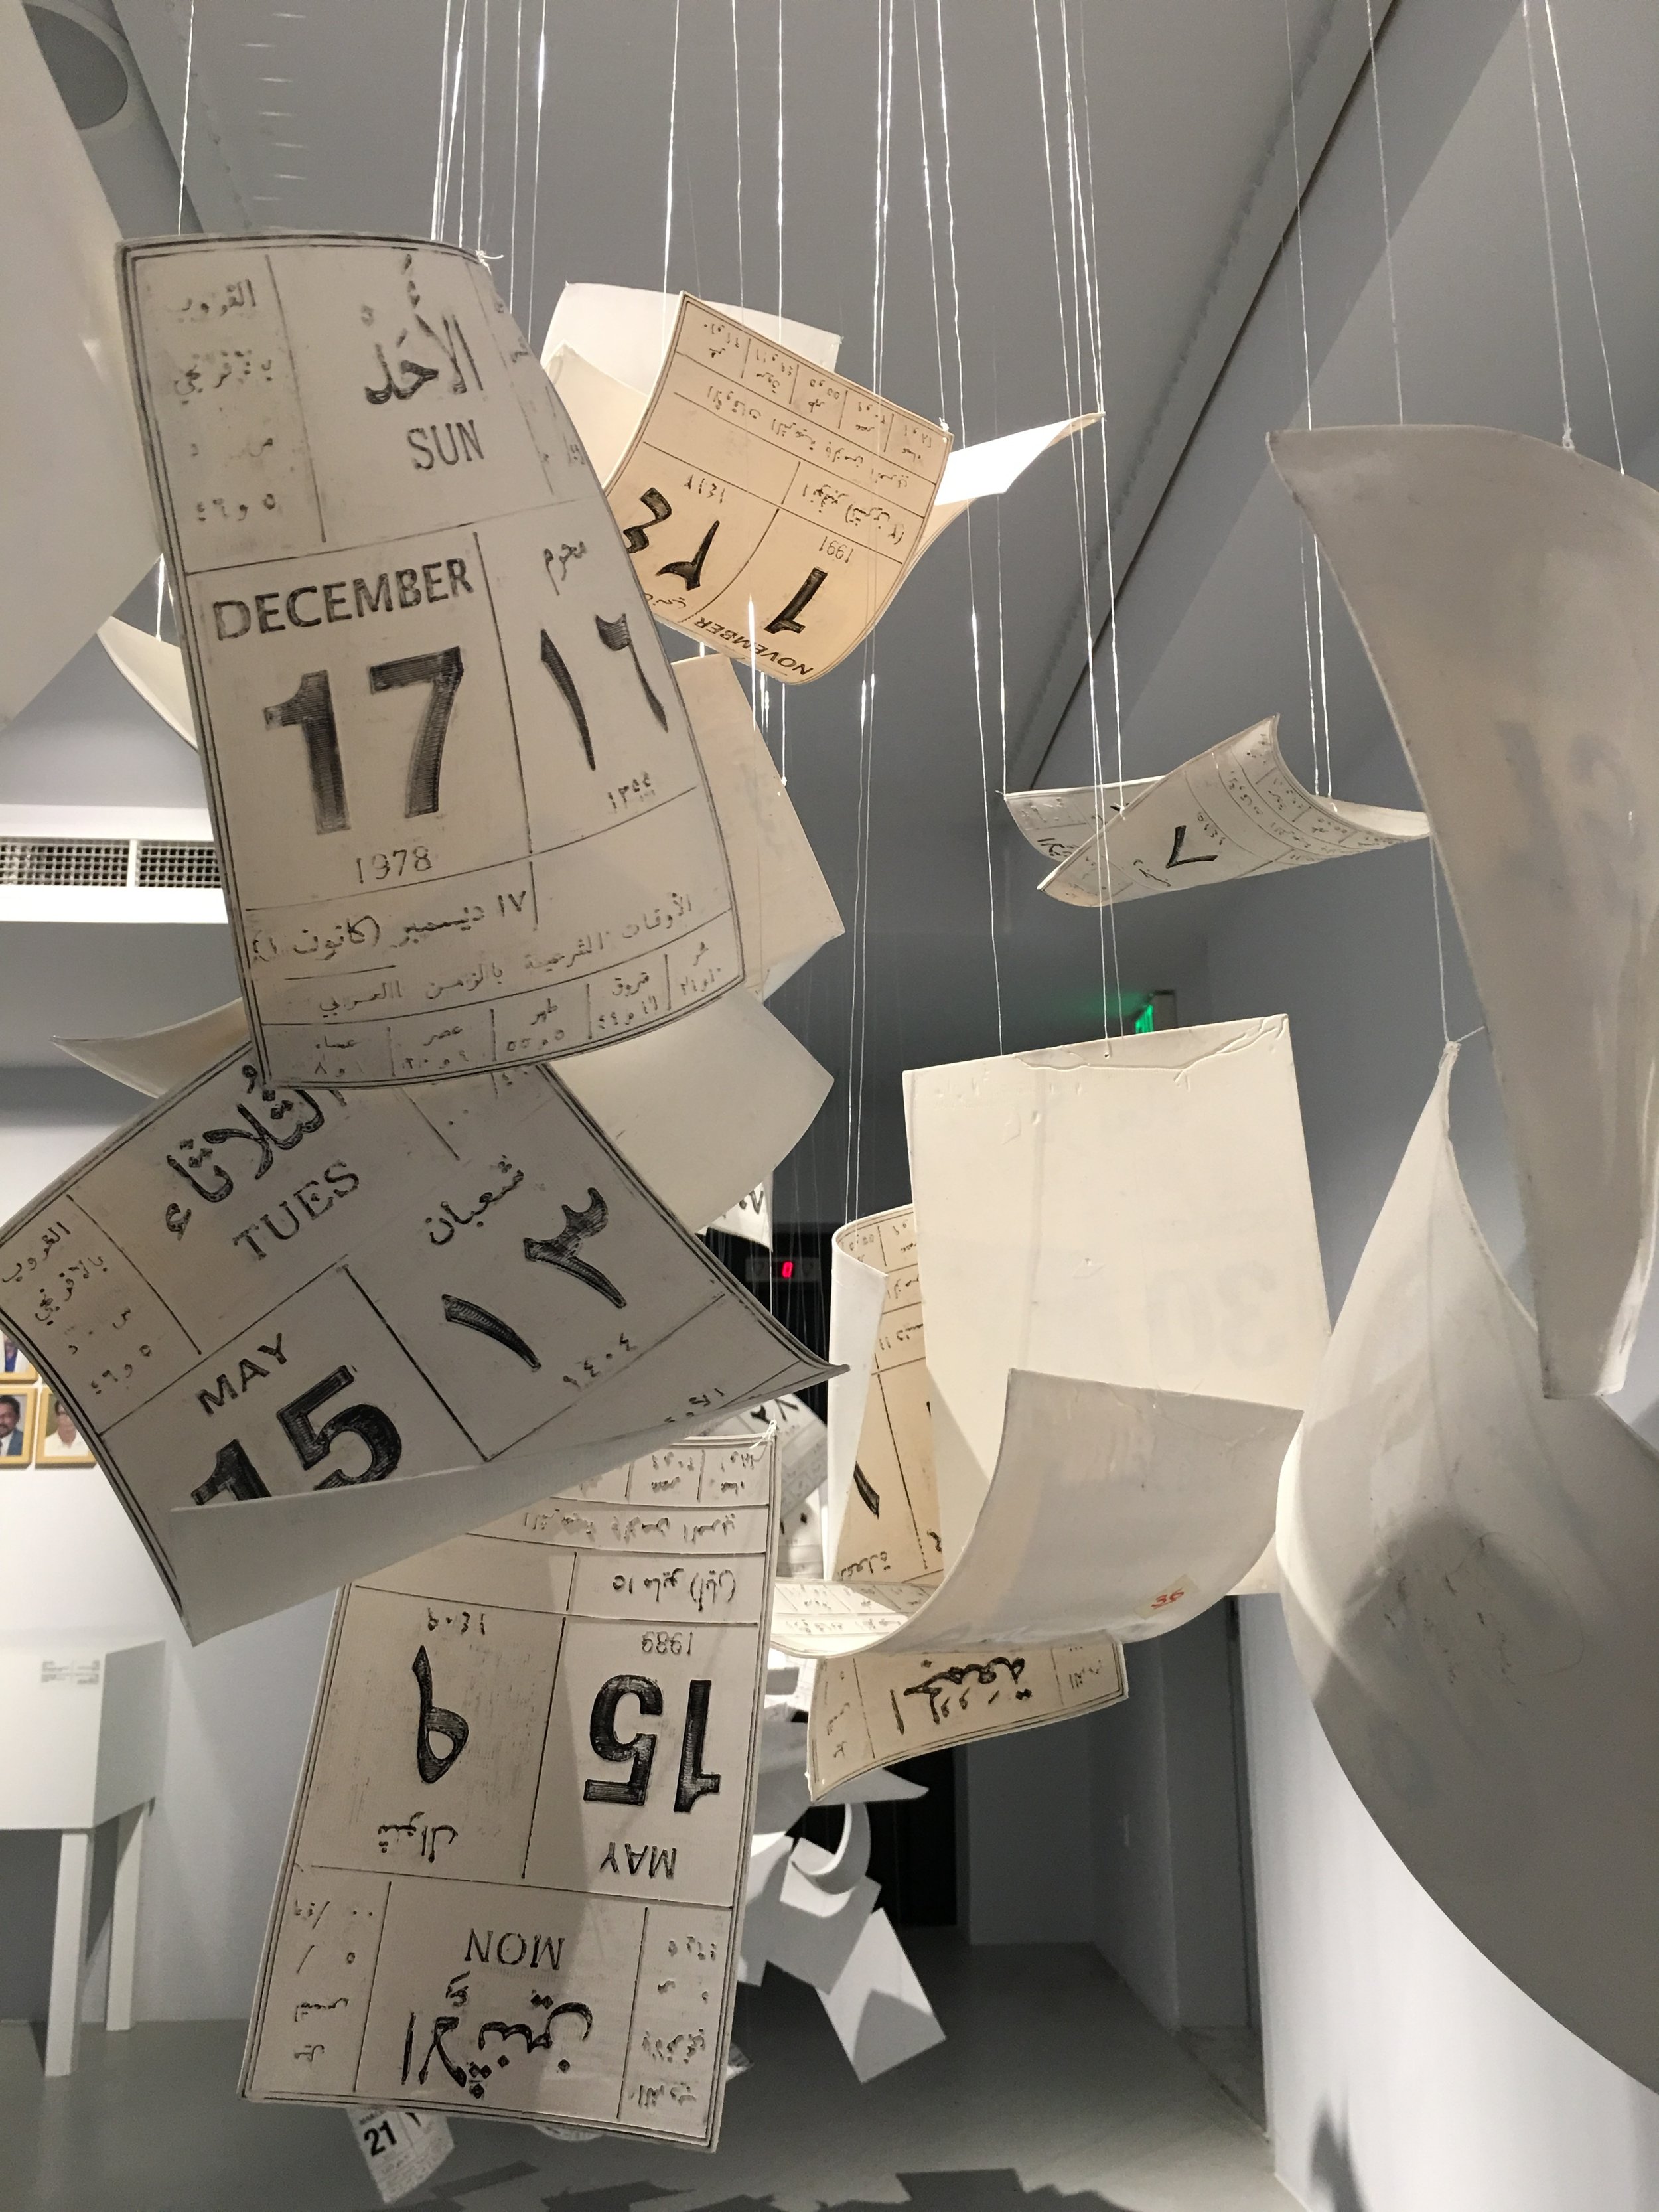 Saswan Al Bahar, Wra'a II Zaman (Leaves of Time), 2015, 3D modelled calendar leaves with printed llithography and nylon string. Courtsey of the artist. Part of ADMAF Collection